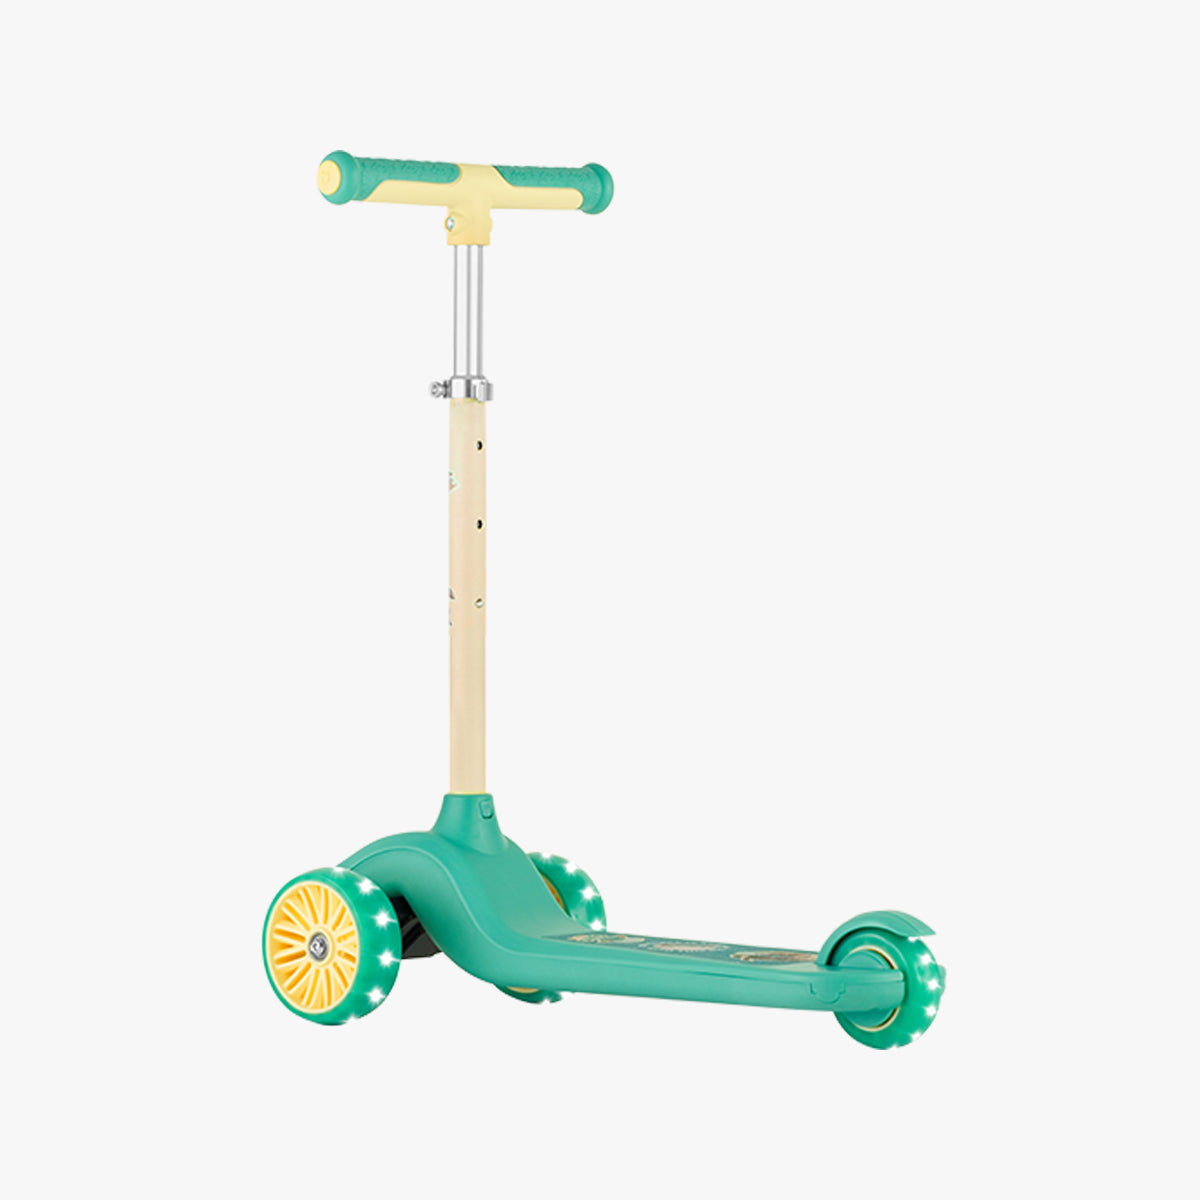 rear angled view of the grogu customizable scooter facing left